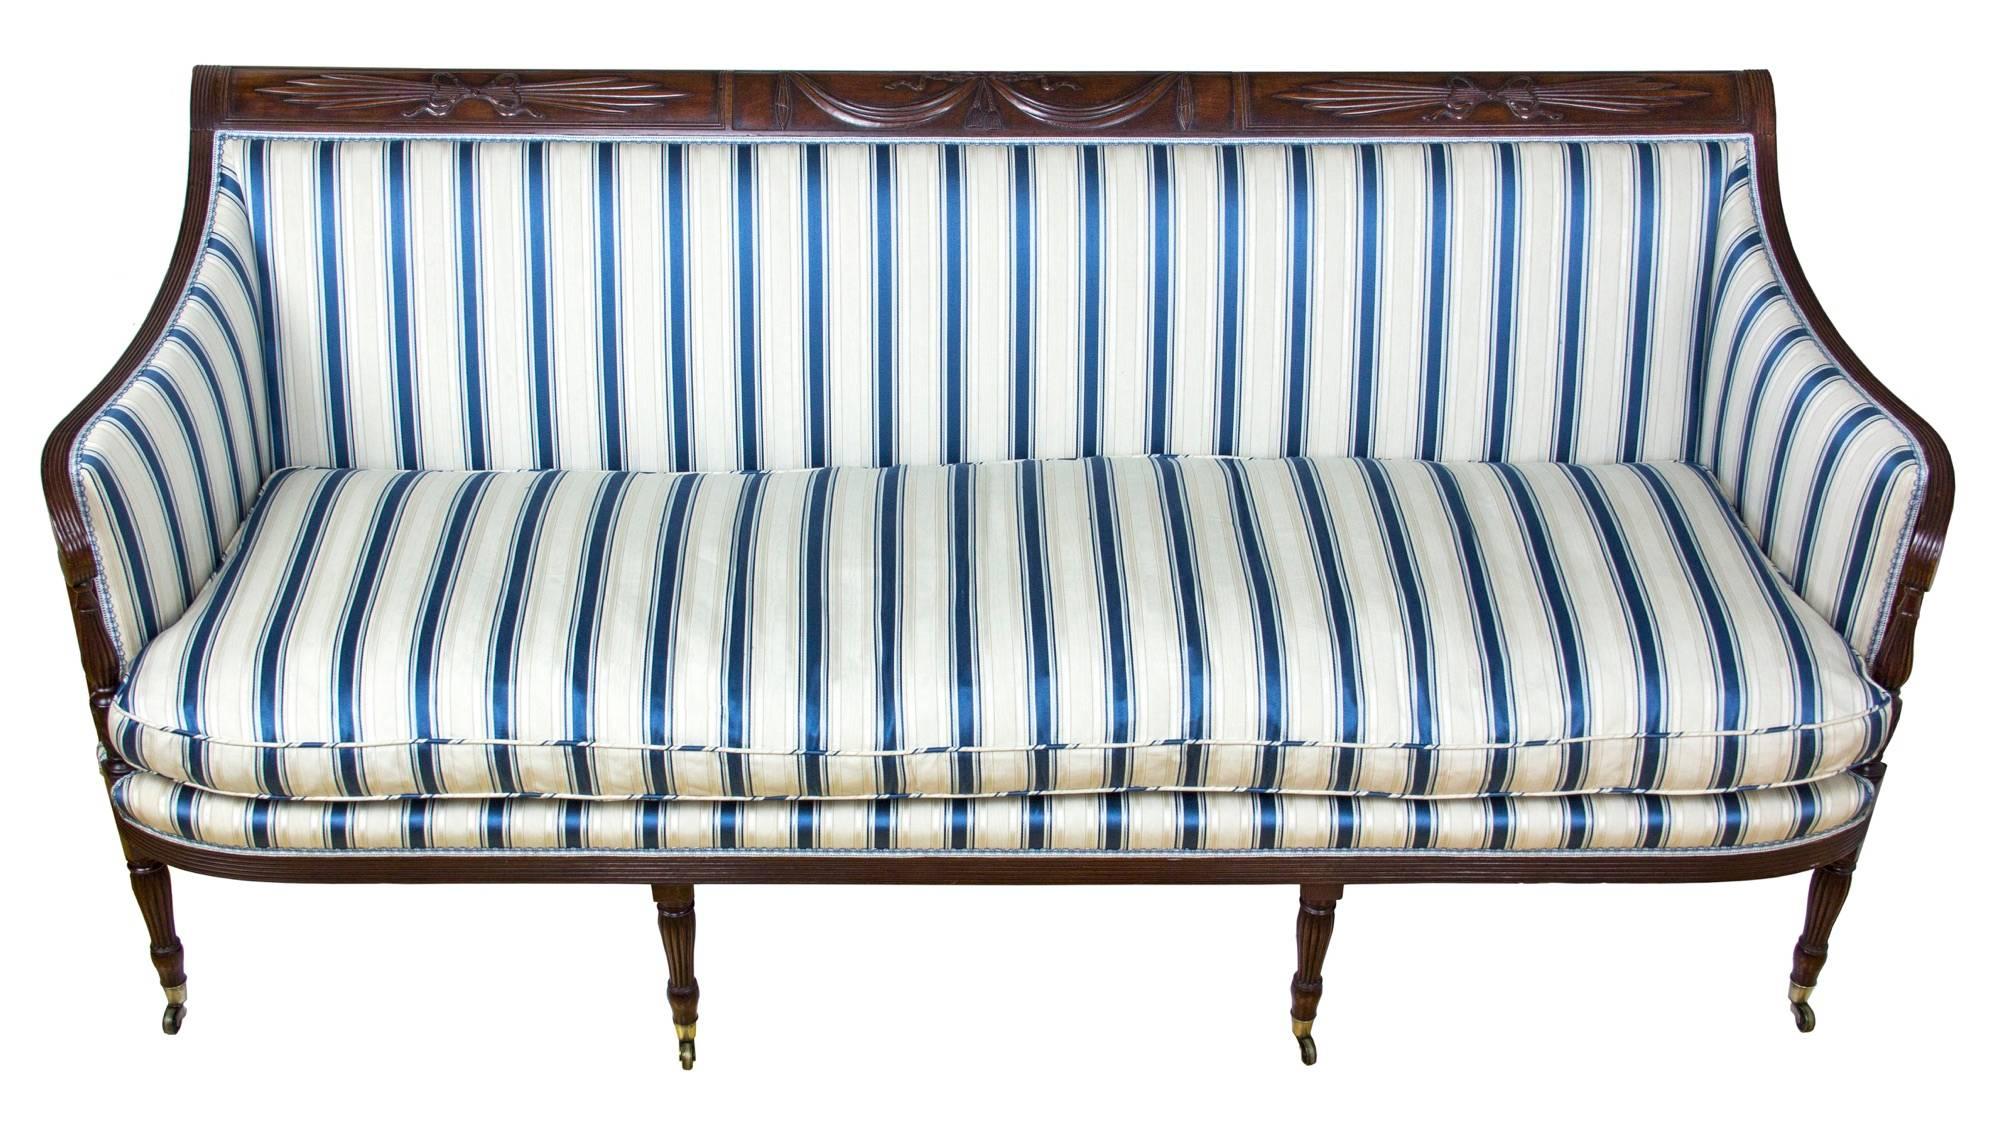 This is the best of the phyfe line of sofas, with the sought-after pronounced turned in arm. A virtually identical example is illustrated in Albert Sack’s new fine points of furniture: early American (see item 253, scanned below). Here, Albert calls